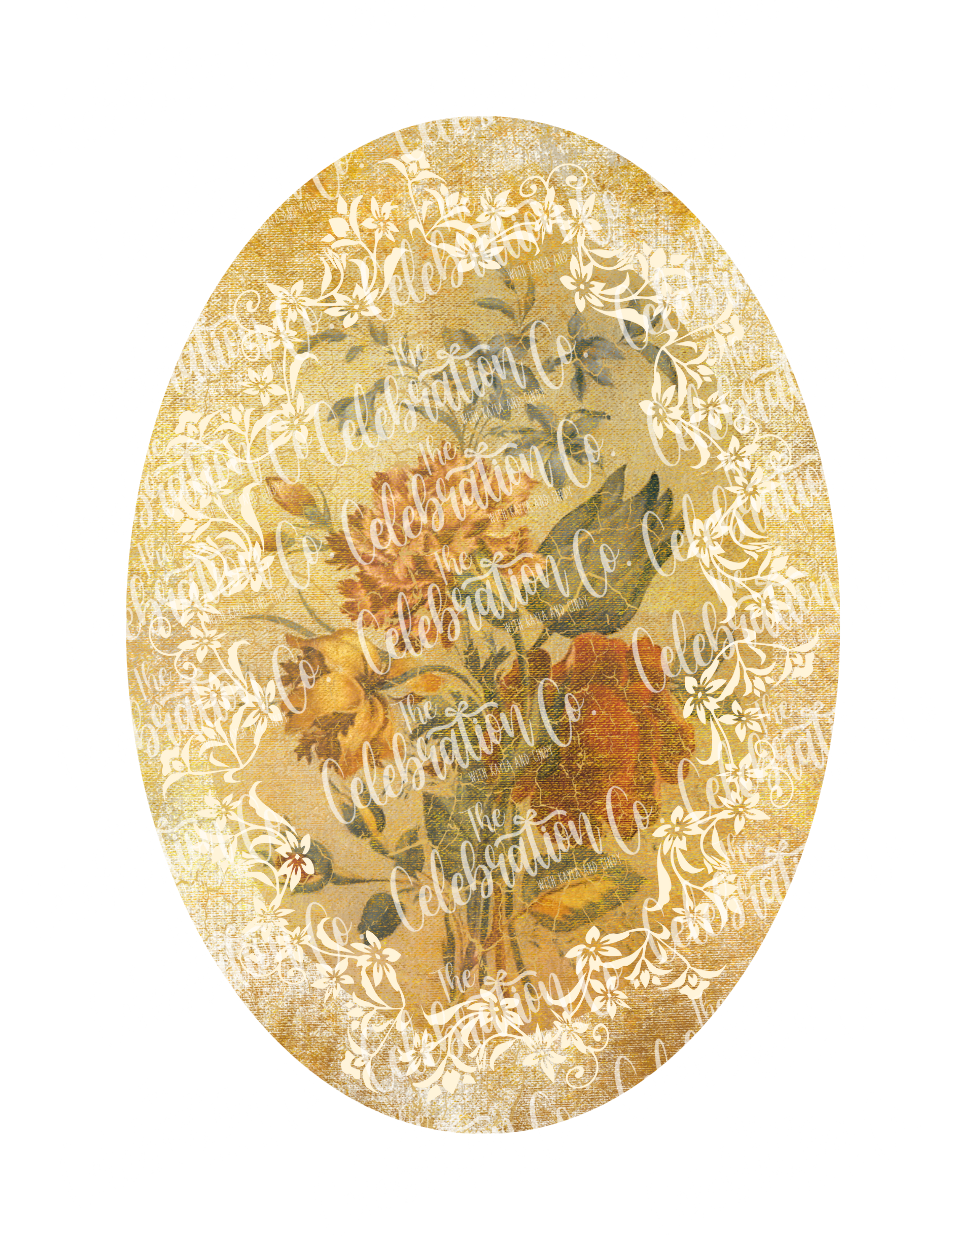 MDF Wood Board - Oval - with Free Printables - The Celebration Co.